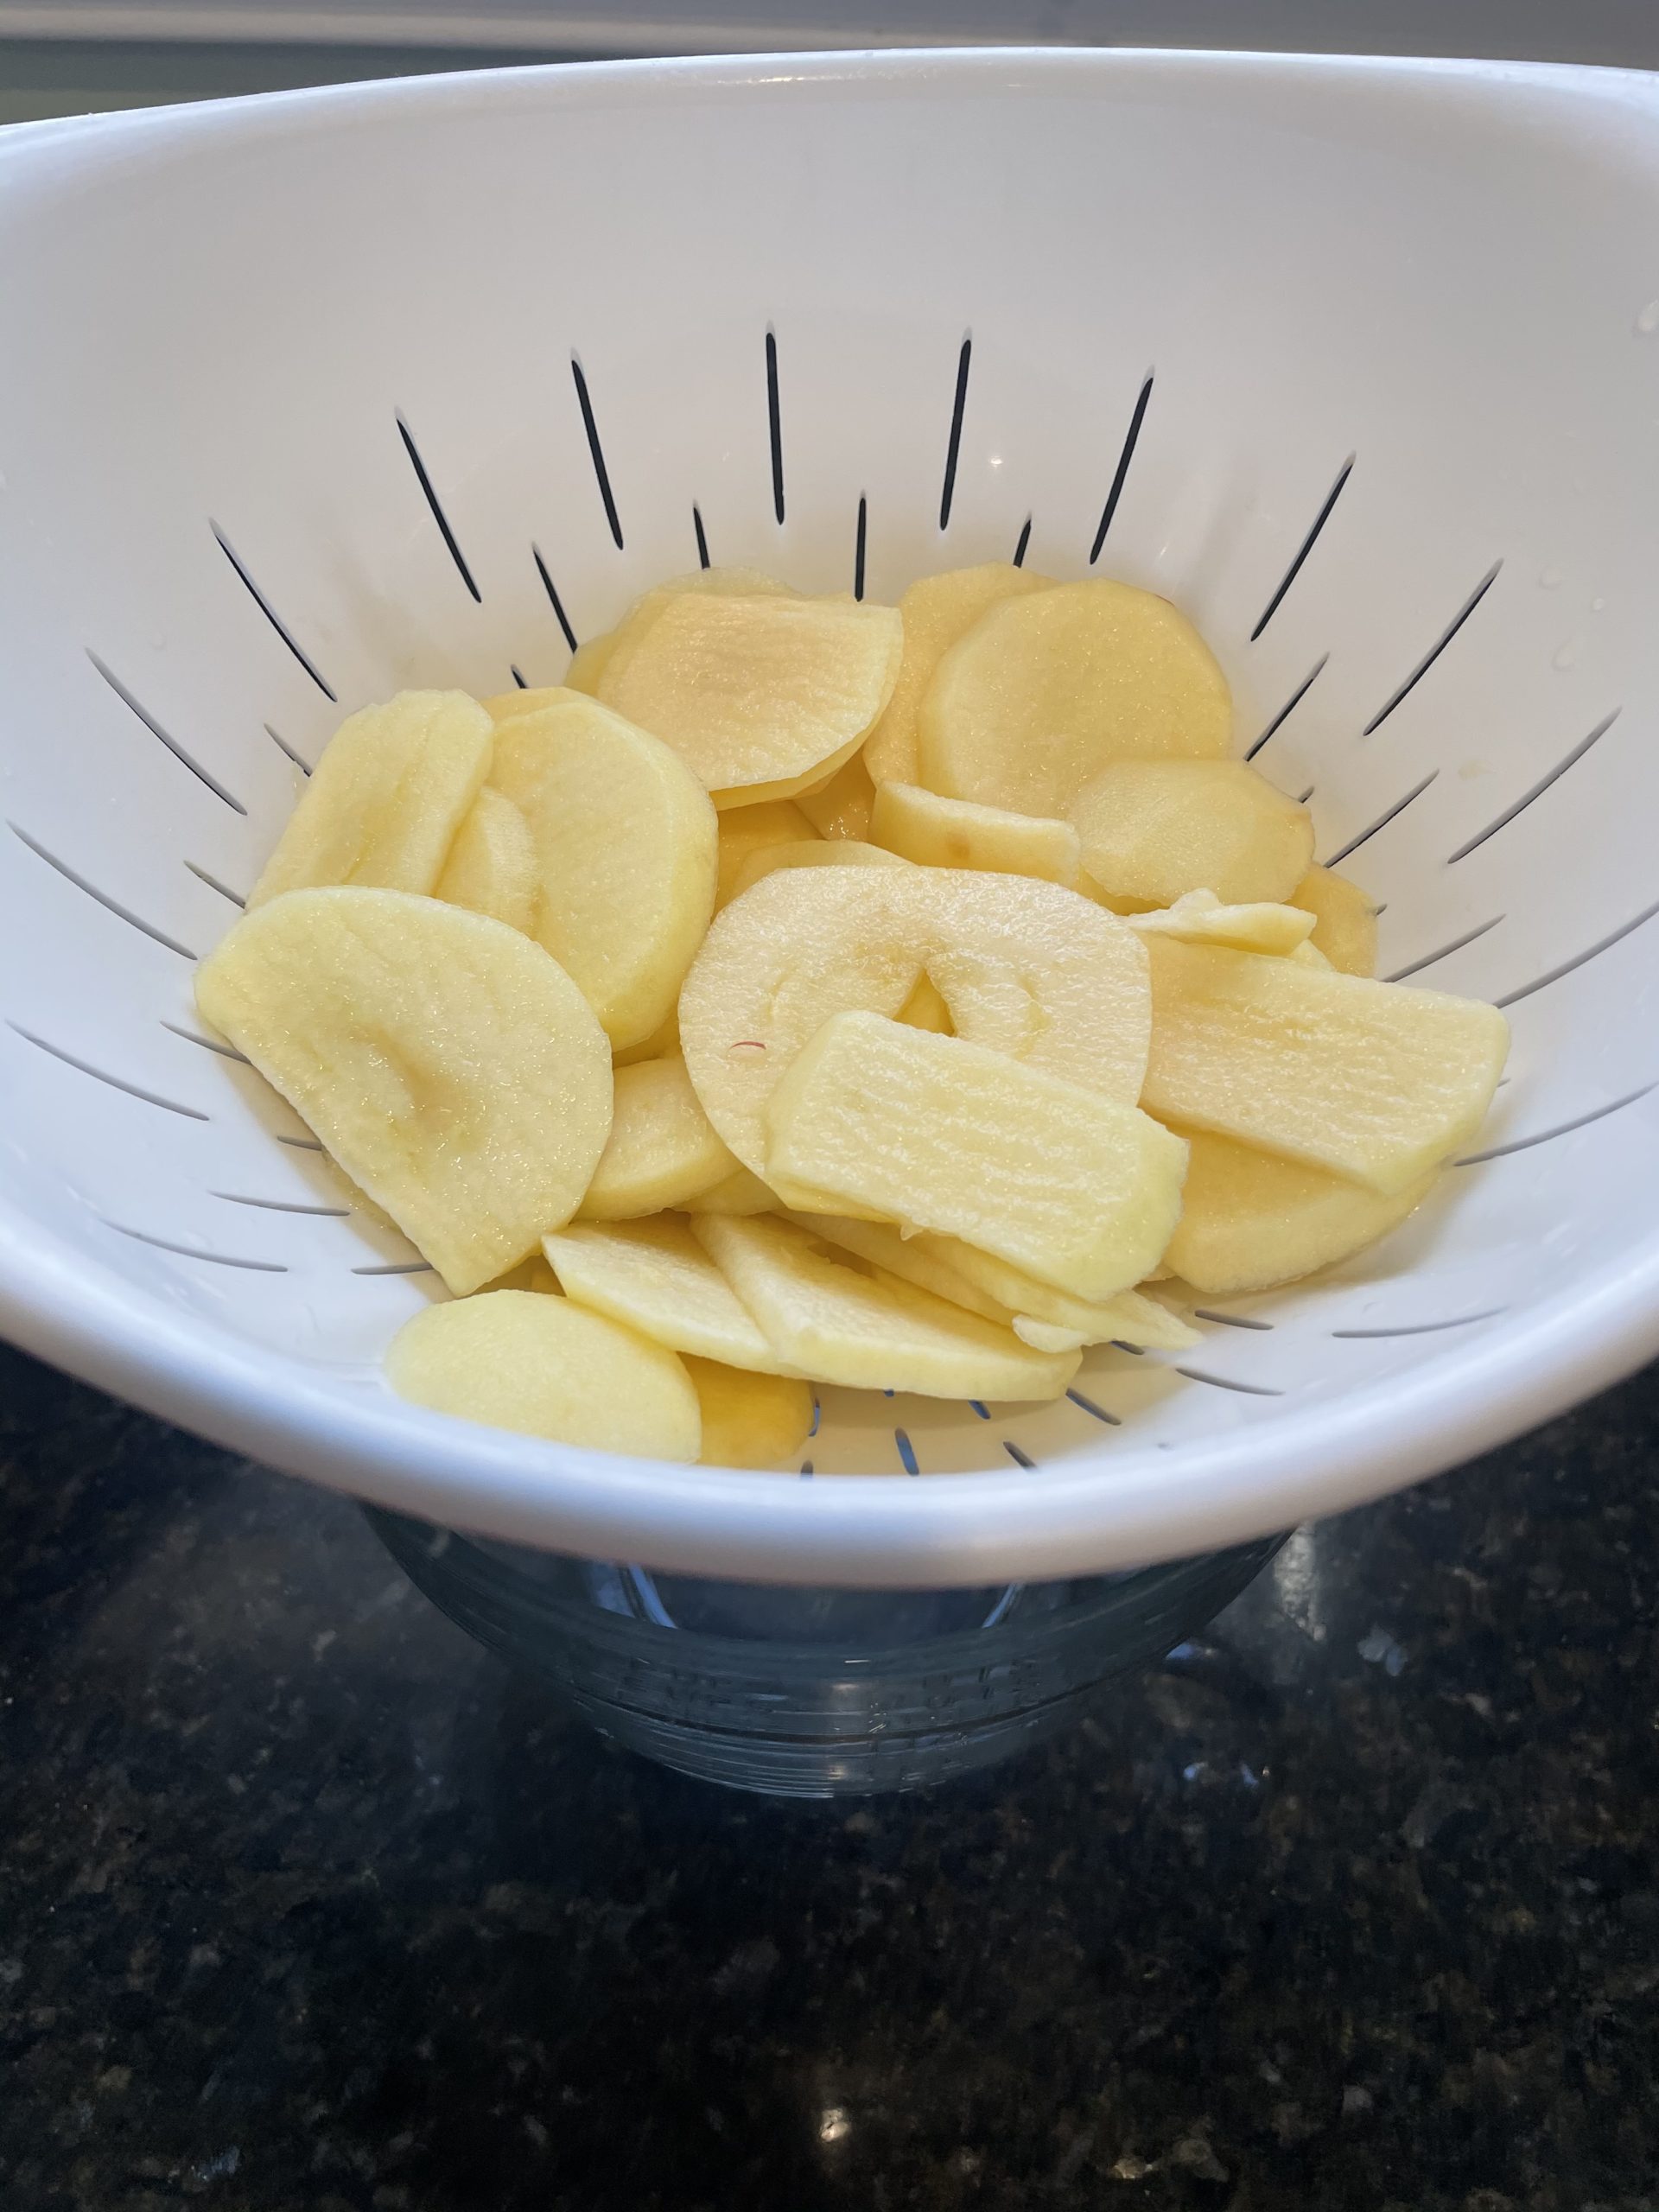 Draining apples to dehydrate